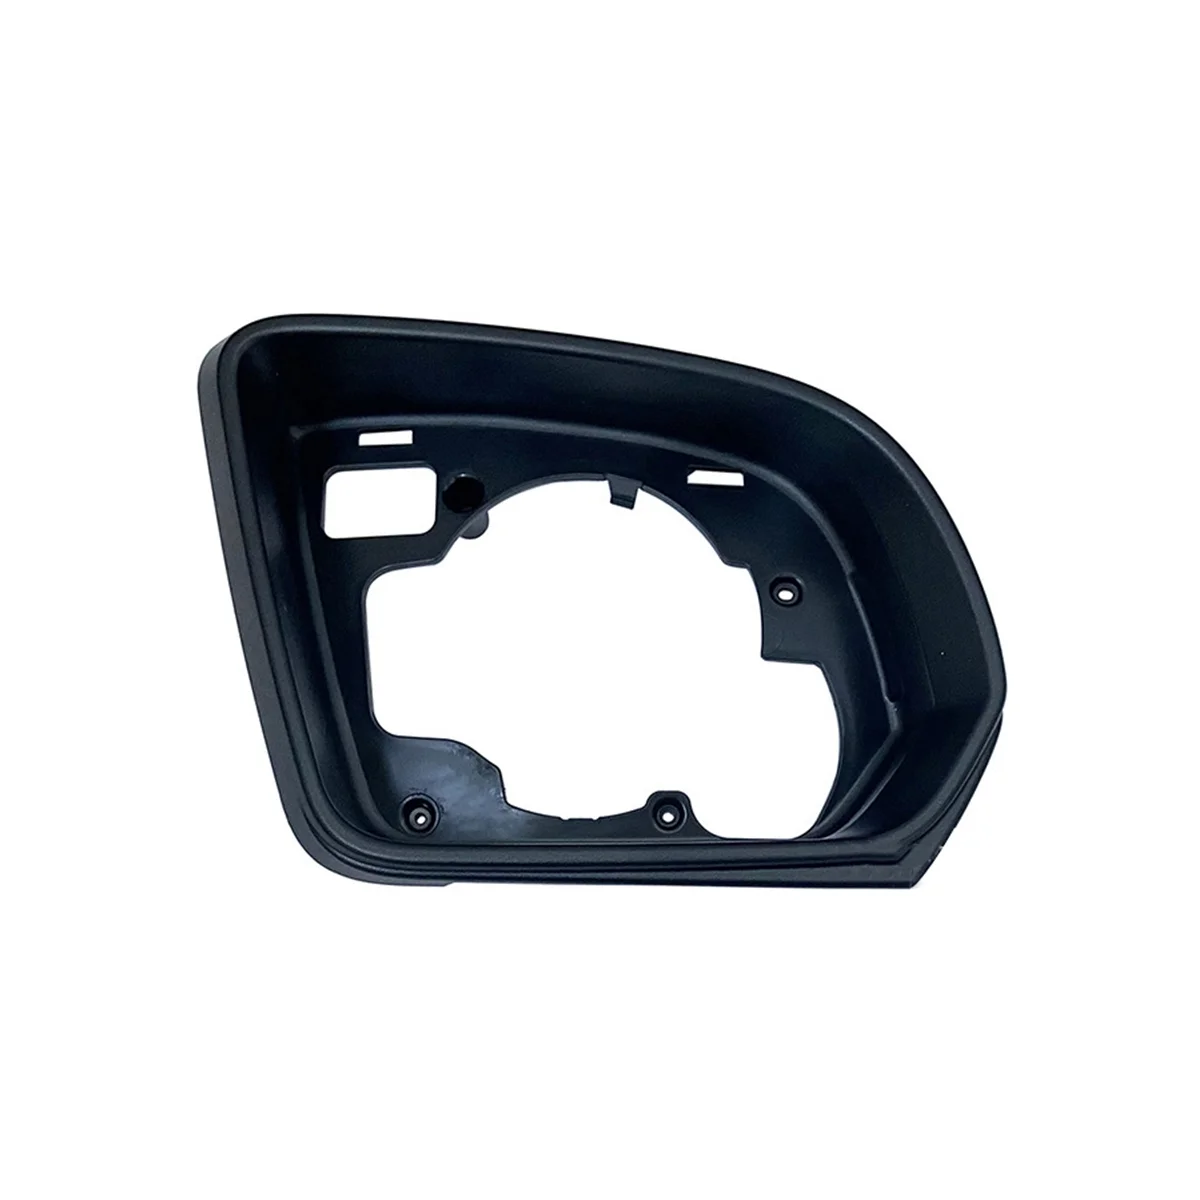 

A4478101600 Car Side Mirror Frame Holder for Mercedes-Benz Vito W447 2016-2021 Rearview Gl Surround Housing Trim